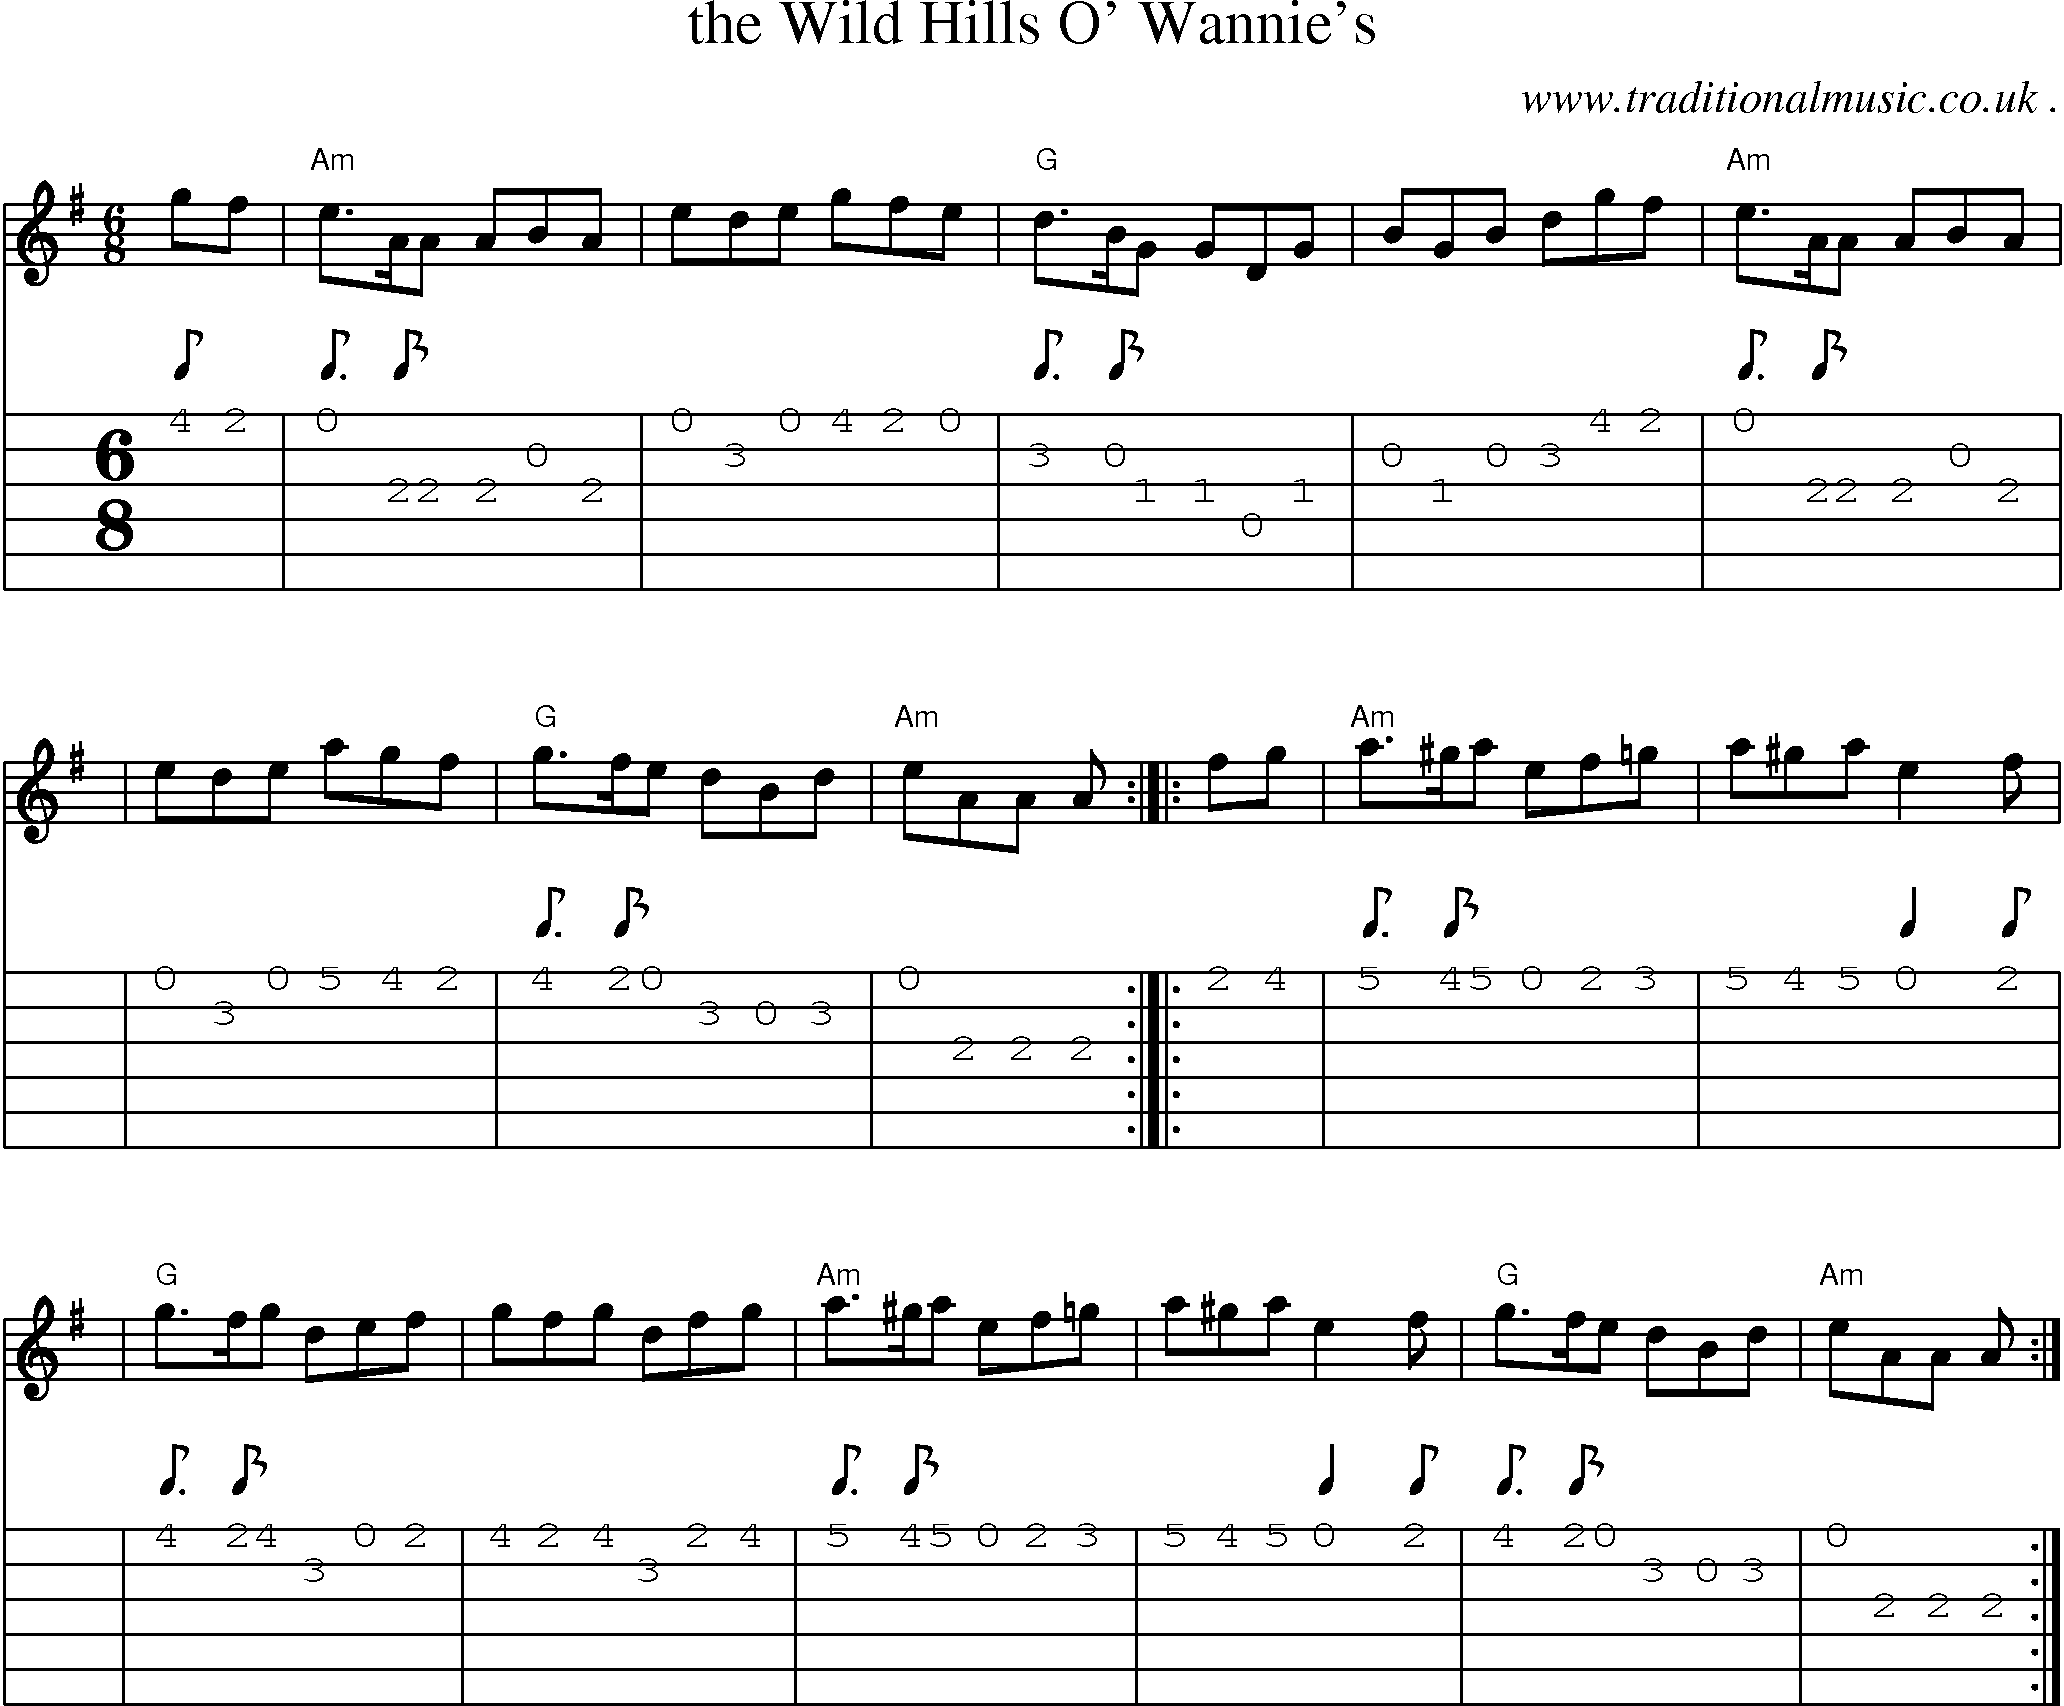 Sheet-music  score, Chords and Guitar Tabs for The Wild Hills O Wannies